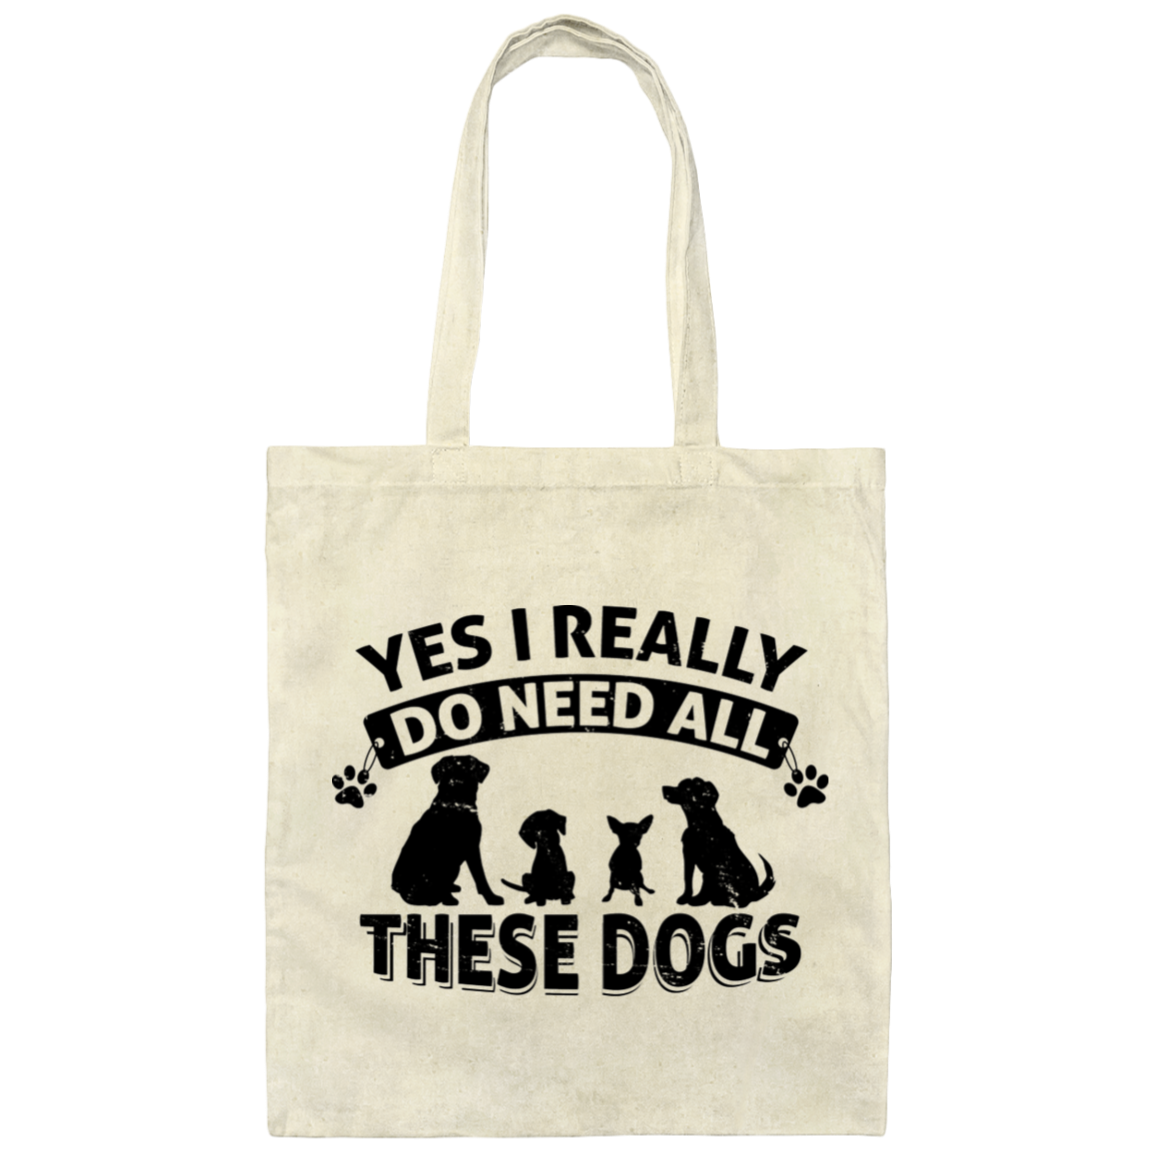 All These Dogs - Canvas Tote Bag